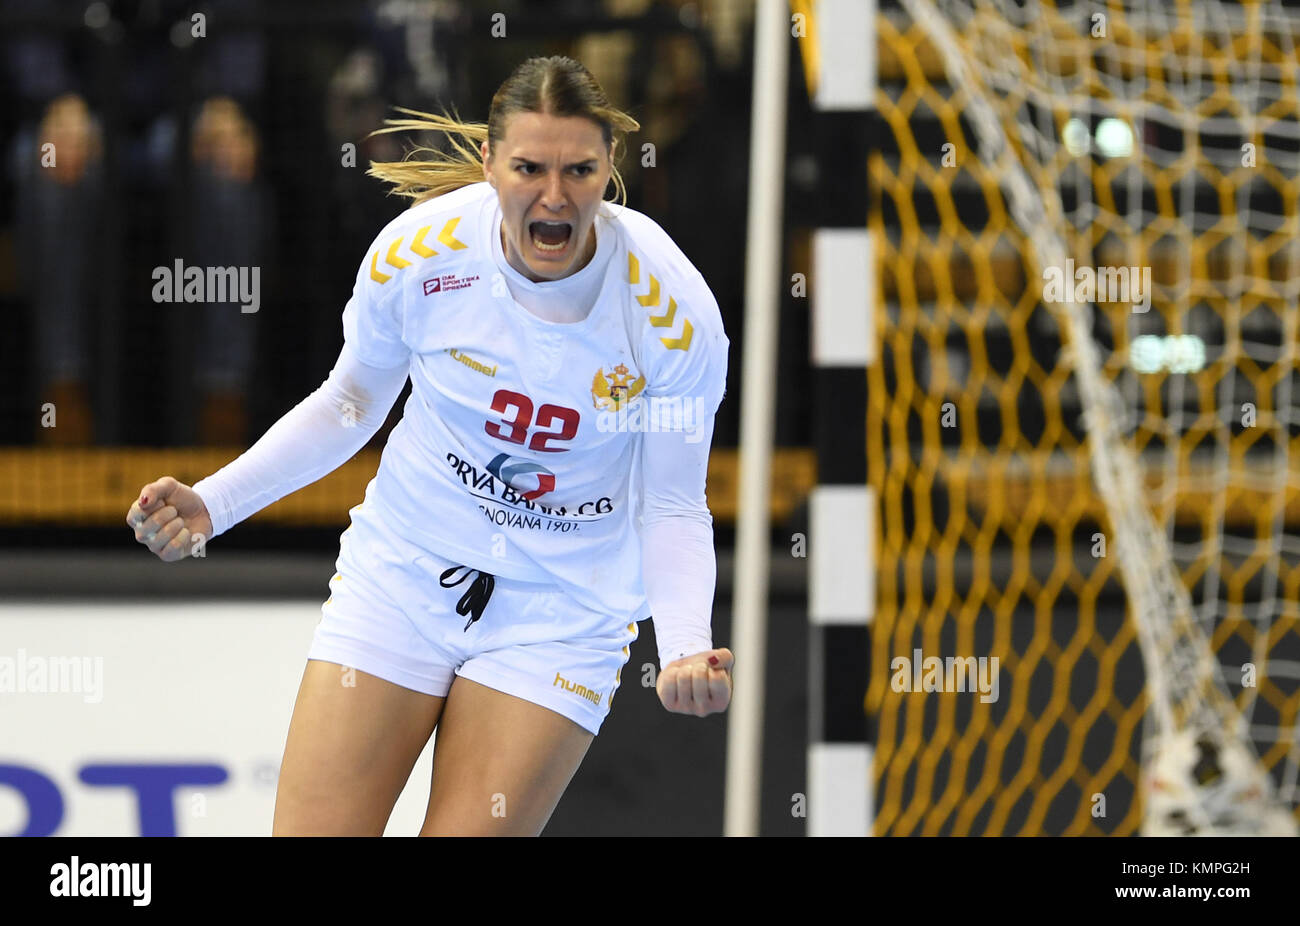 Oldenburg, Germany. 8th Dec, 2017. l-r) Katarina Bulatovic of Montenegro  celebrates after a goal during the Women's Handball World Championship  match between Brazil and Montenegro at the EWE Arena in Oldenburg, Germany,